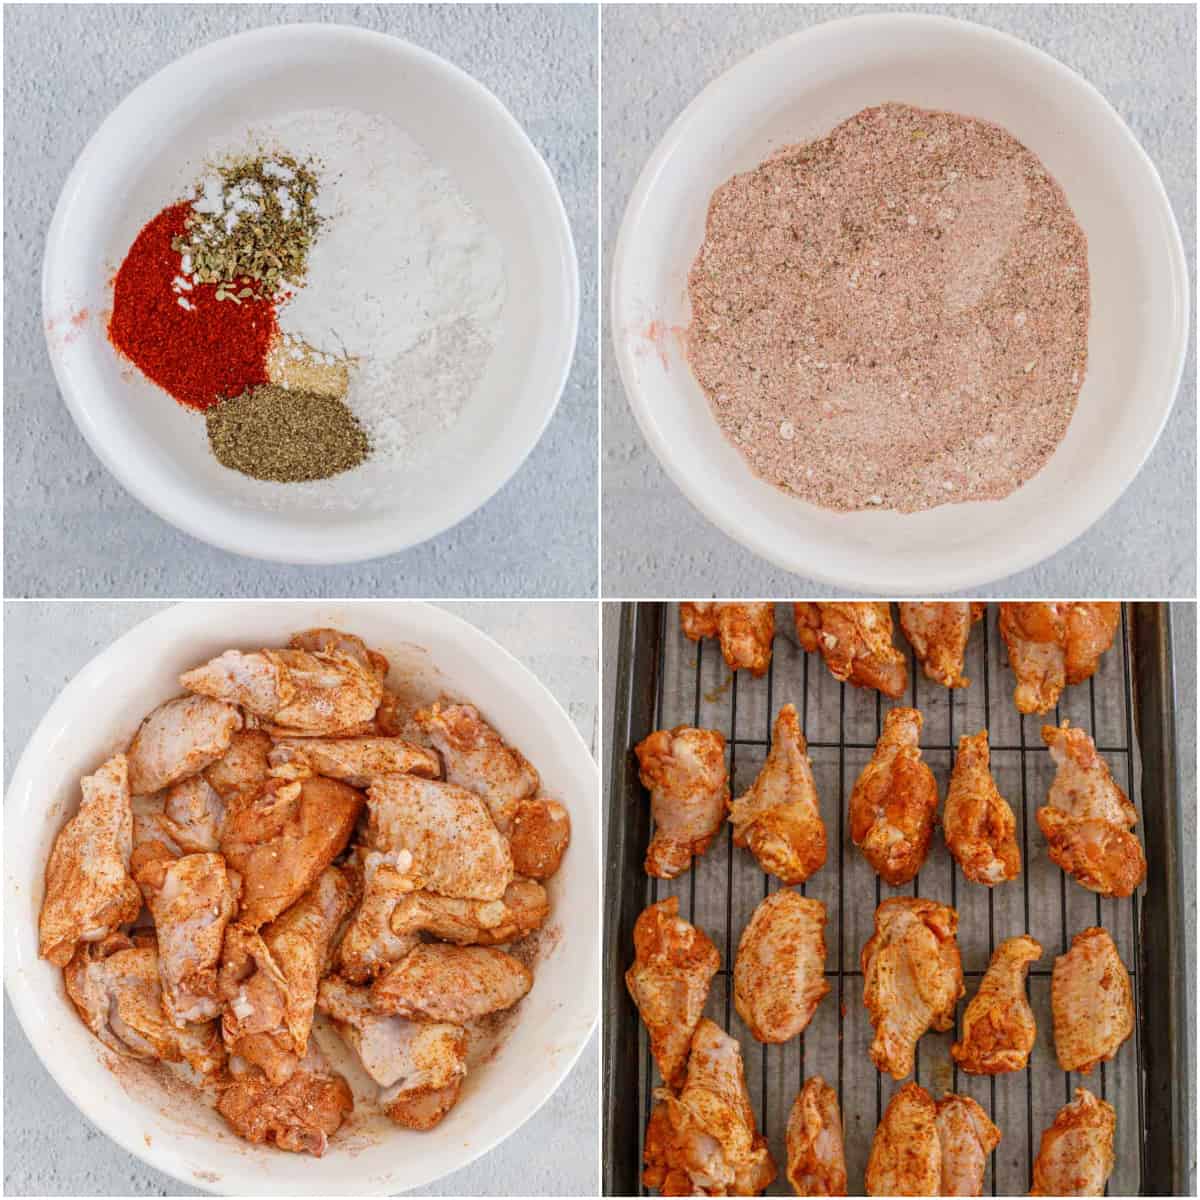 Step by step image collage on how to make chicken baked wings.